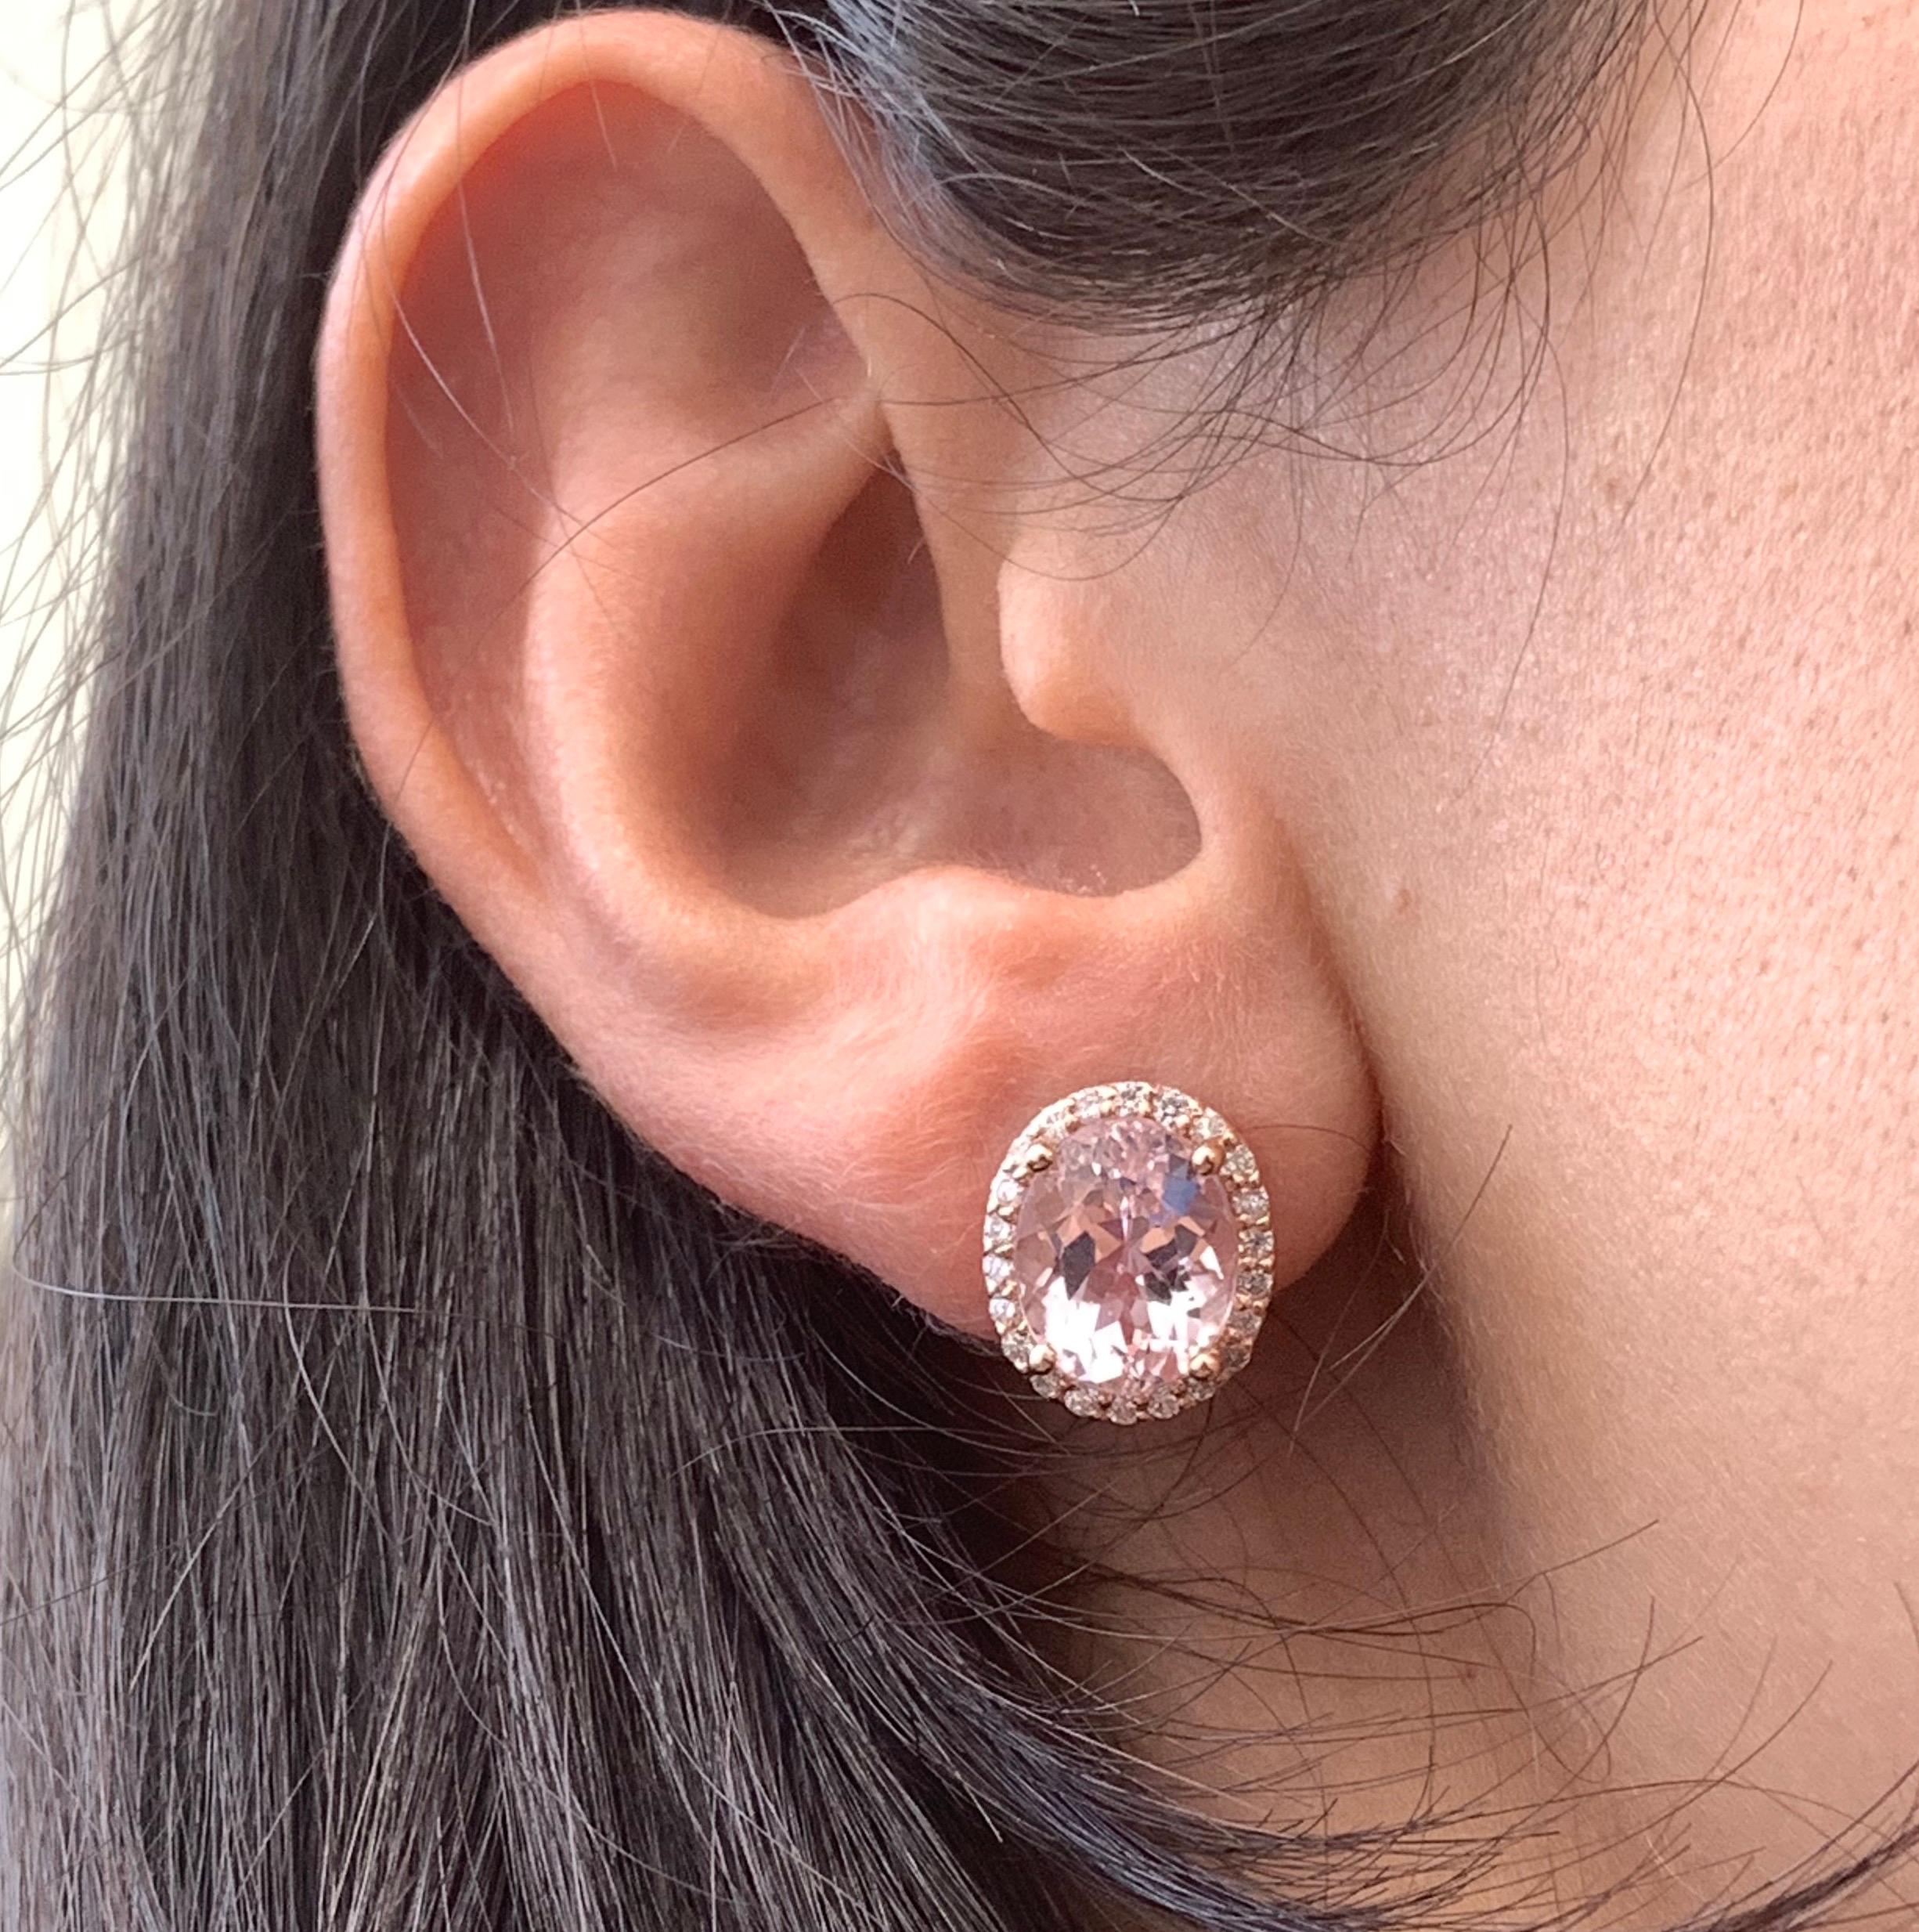 Classic oval pink morganites in a showstopping diamond halo for a fabulous addition to any look!

Material: 14k Rose Gold 
Center Stone Details: 2 Oval Pink Morganites at 4.4 Carats- Measuring 10 x 8 mm
Mounting Diamond Details: 44 Brilliant Round